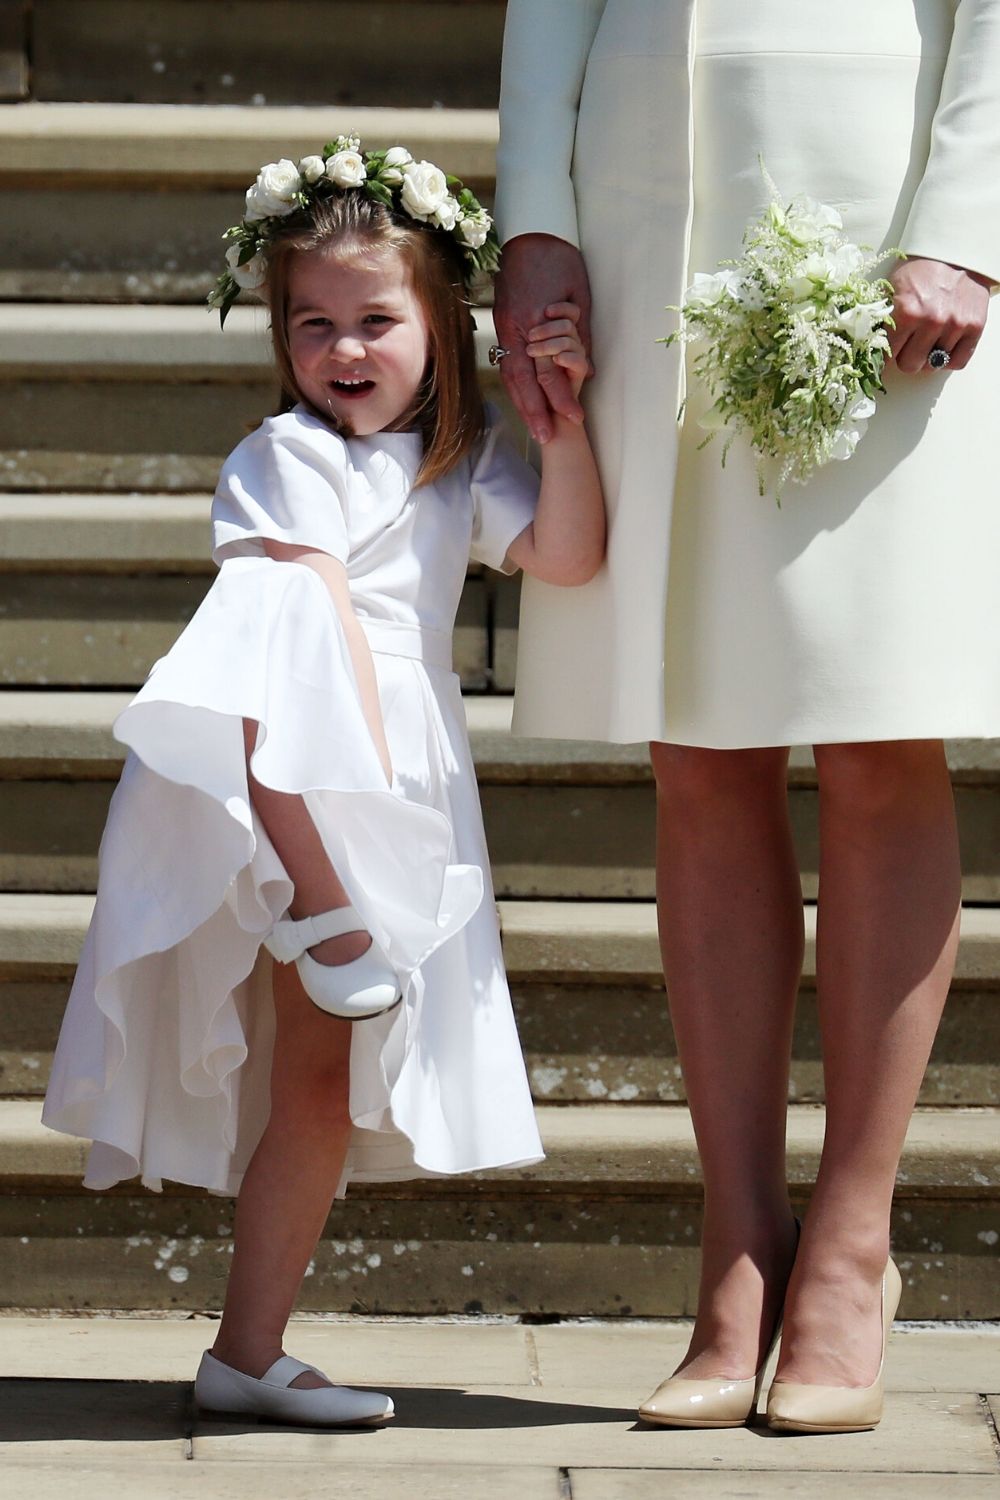 Princess Charlotte posing at Harry and Meghan's wedding in 2018.